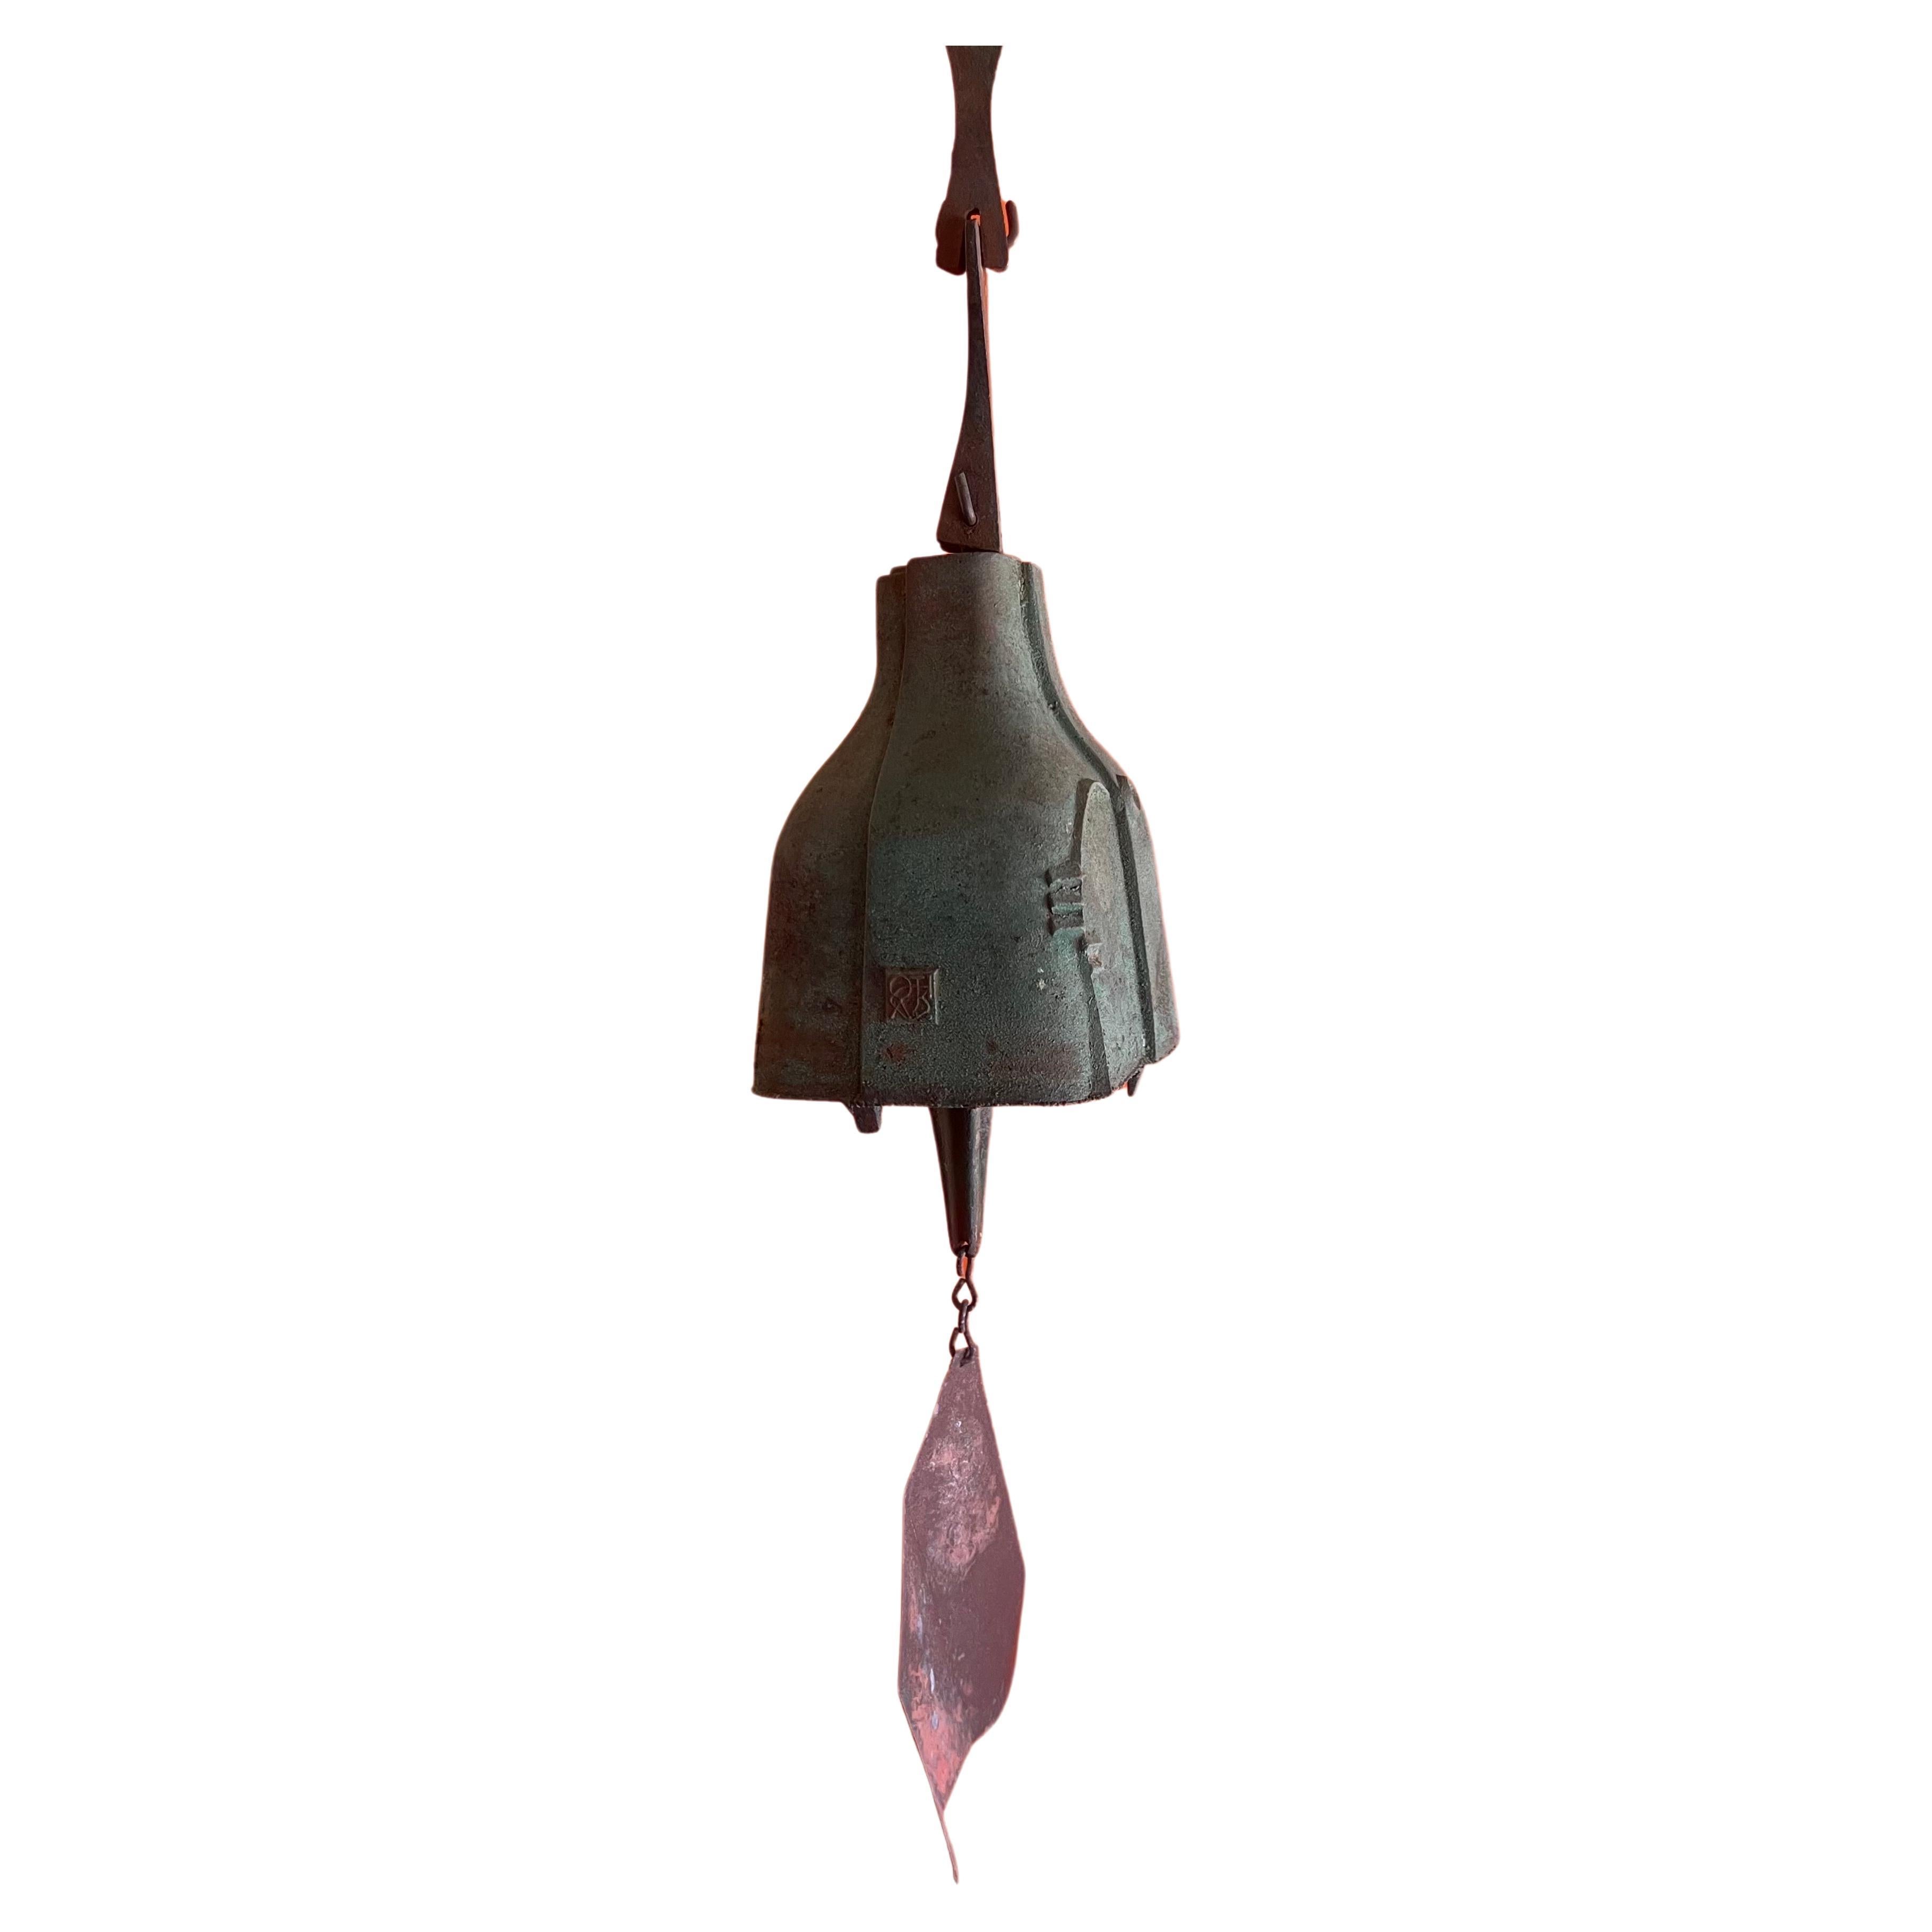 Large bronze wind chime / bell by Paolo Soleri for Cosanti, circa 1970s. The piece is is 39.75